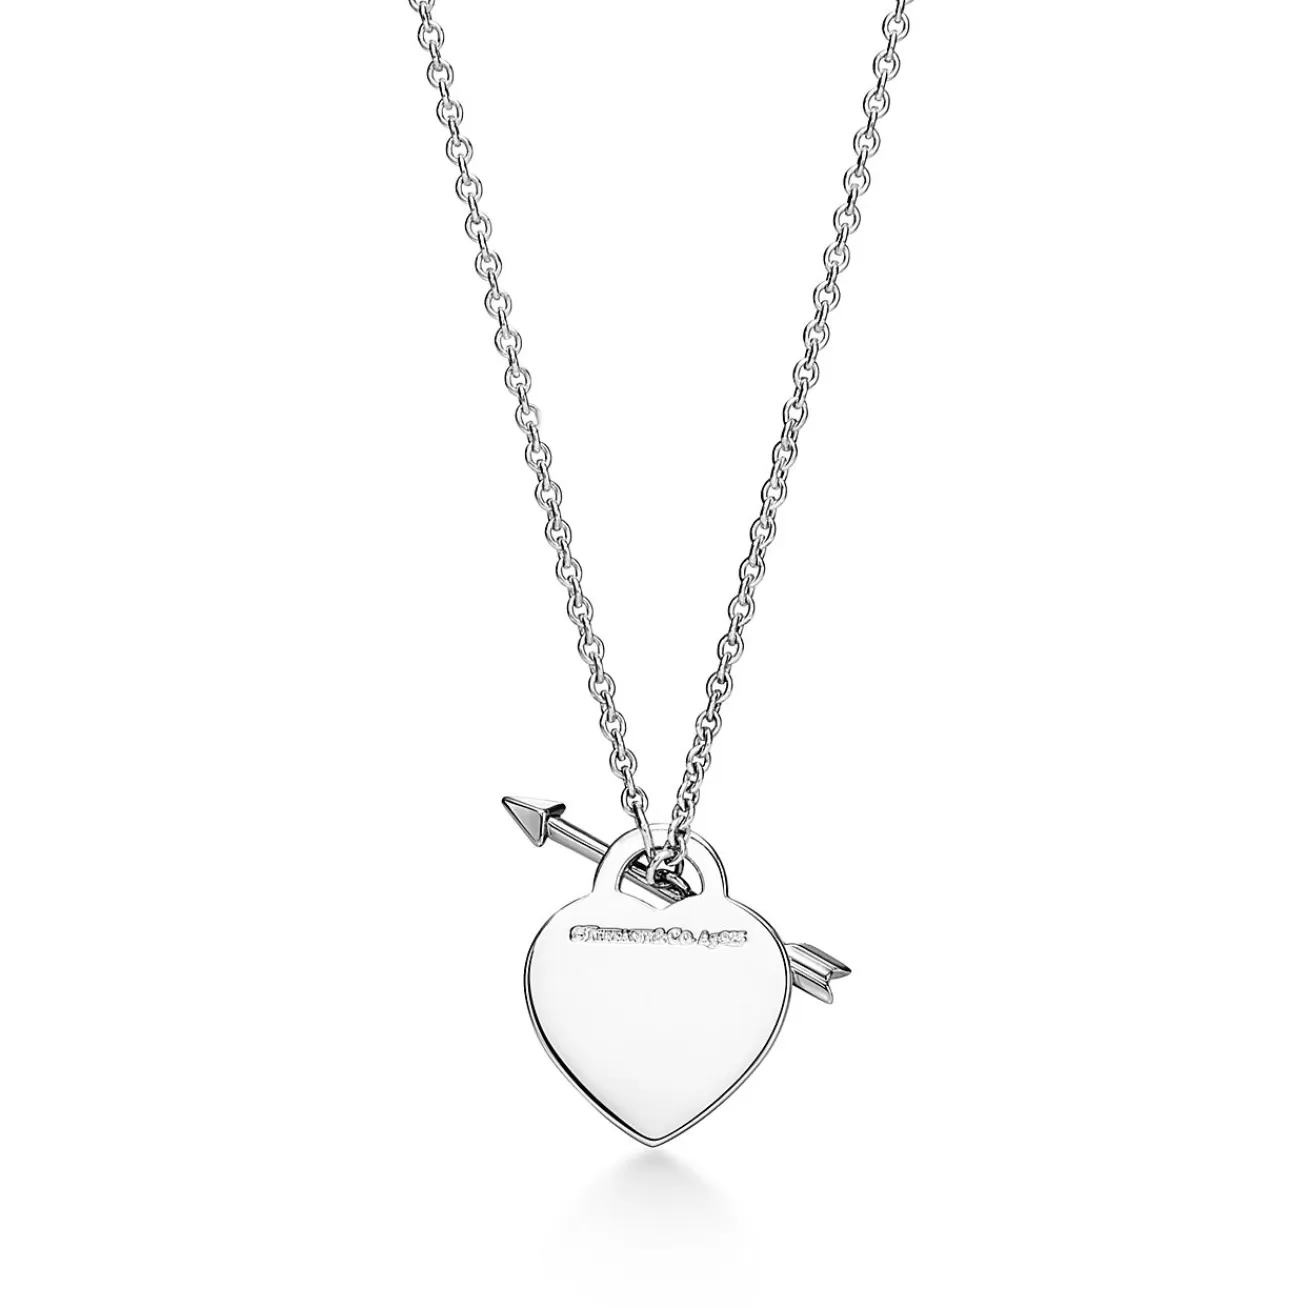 Tiffany & Co. Return to Tiffany® Lovestruck Pendant in Sterling Silver, Medium | ^ Necklaces & Pendants | Sterling Silver Jewelry